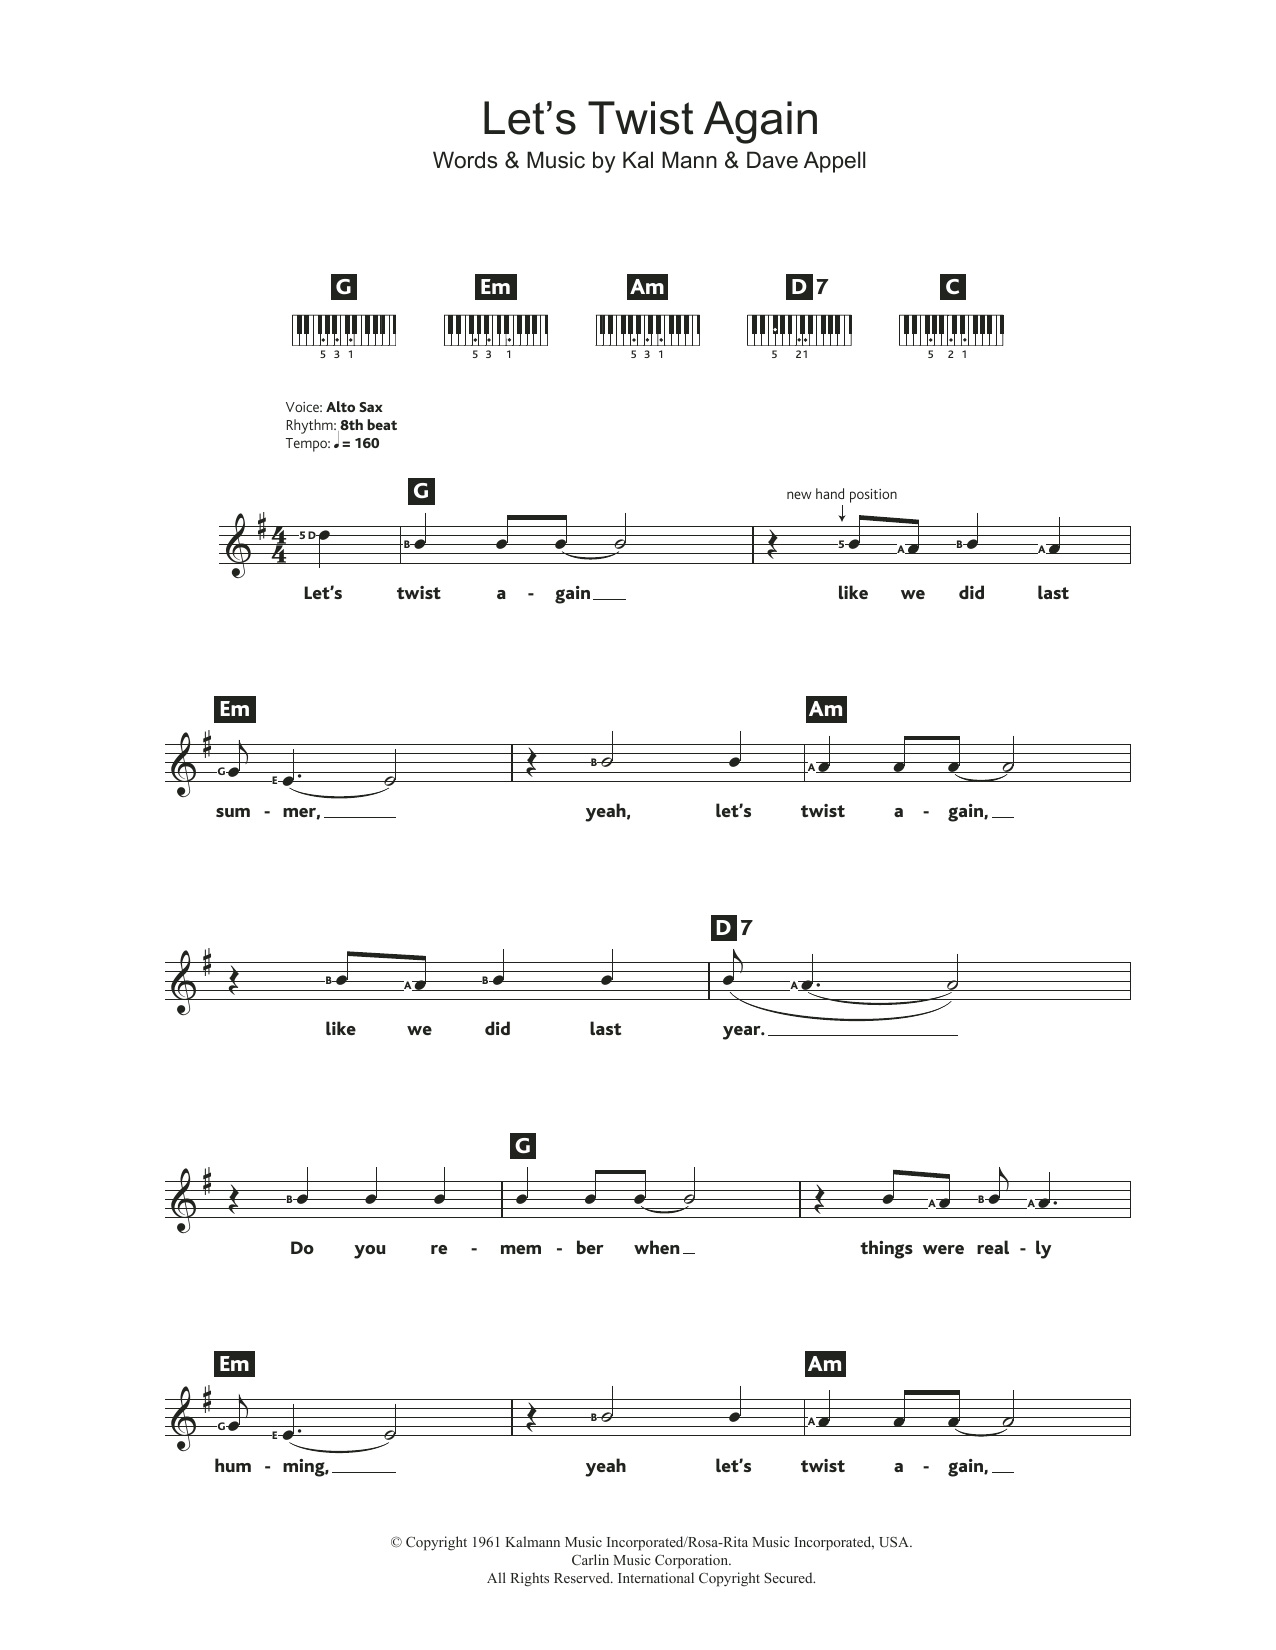 Download Chubby Checker Let's Twist Again Sheet Music